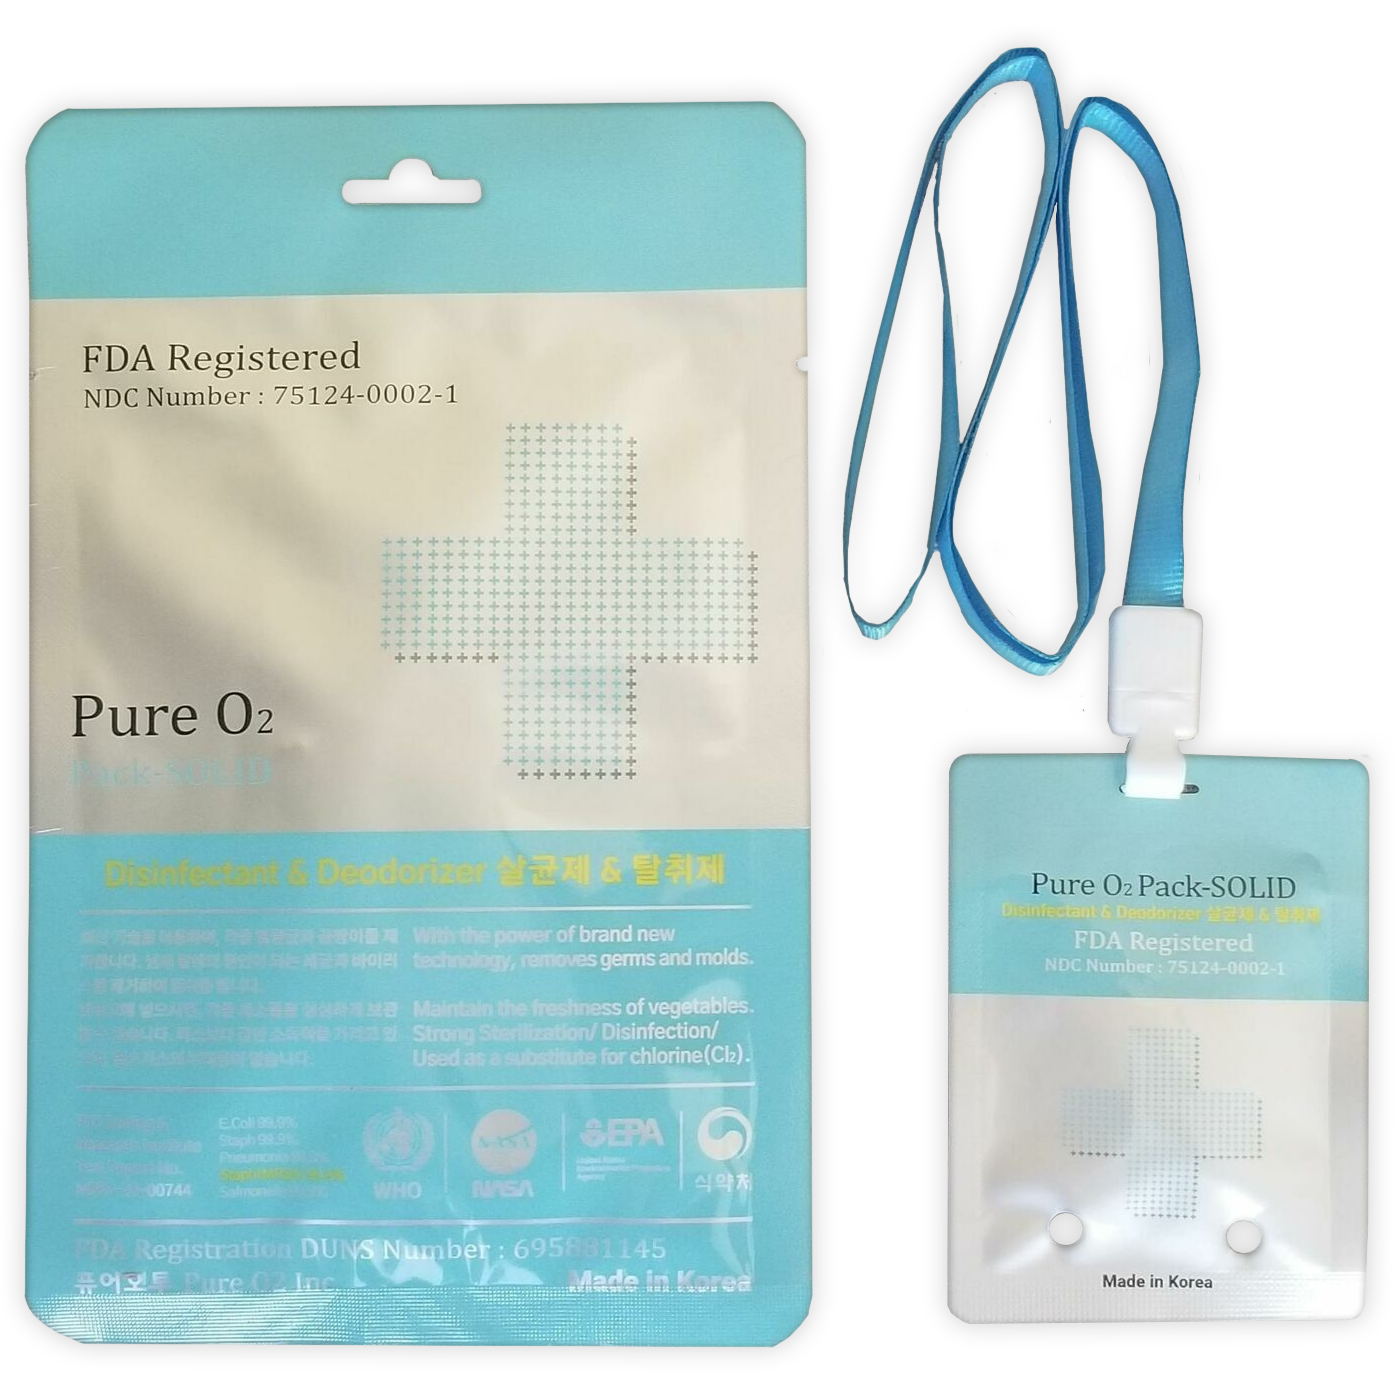 PureO2 Pack Solid